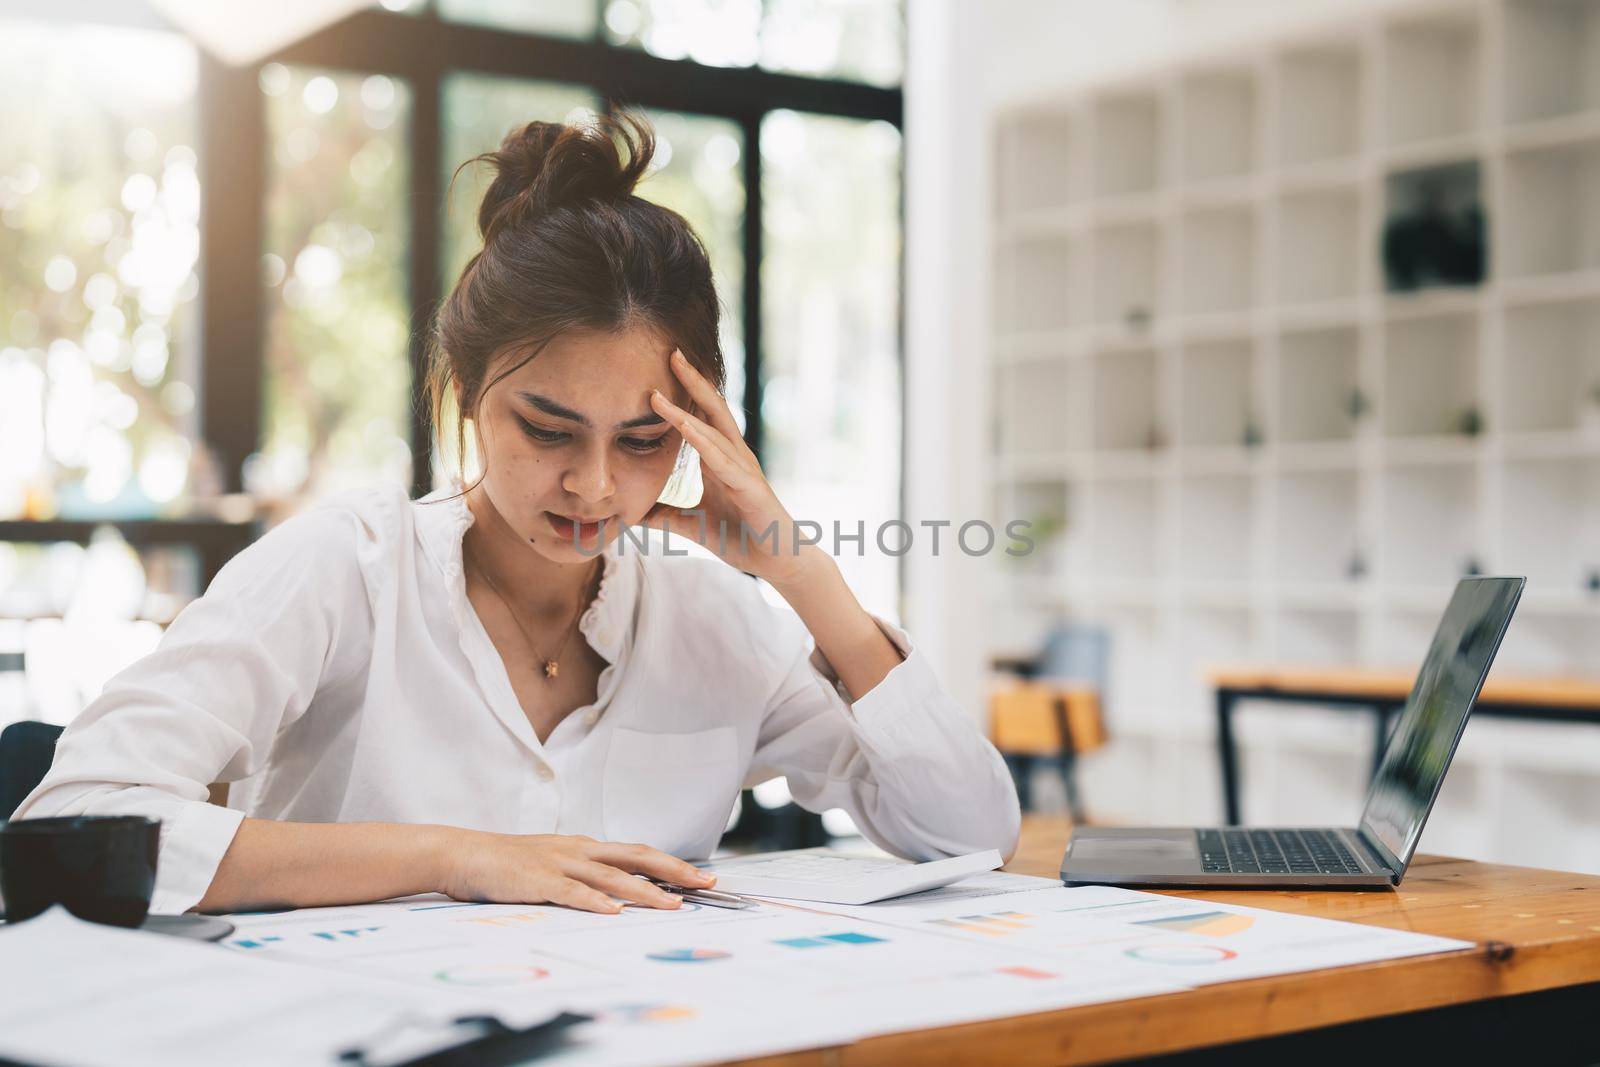 Young asian Woman Office Worker Uses Laptop, Feels Sudden Burst of Pain, Headache, Migraine. Overworked Accountant Feeling Project Pressure, Stress, Massages Her Head, Temples. by nateemee